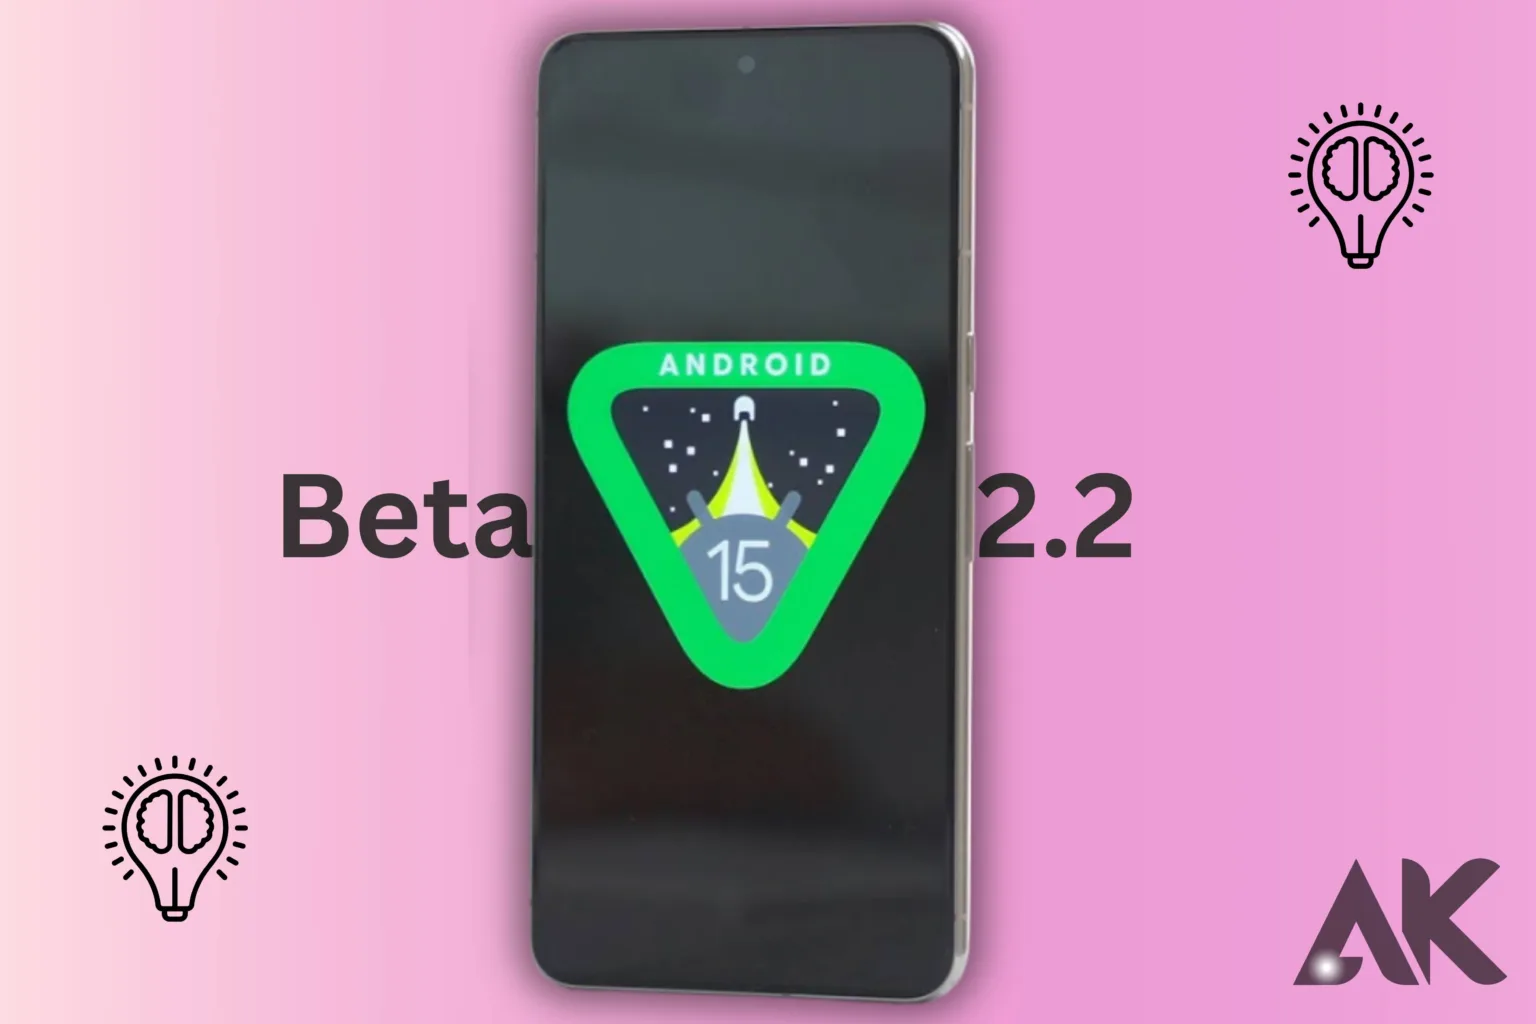 Android 15 Beta 2.2 features